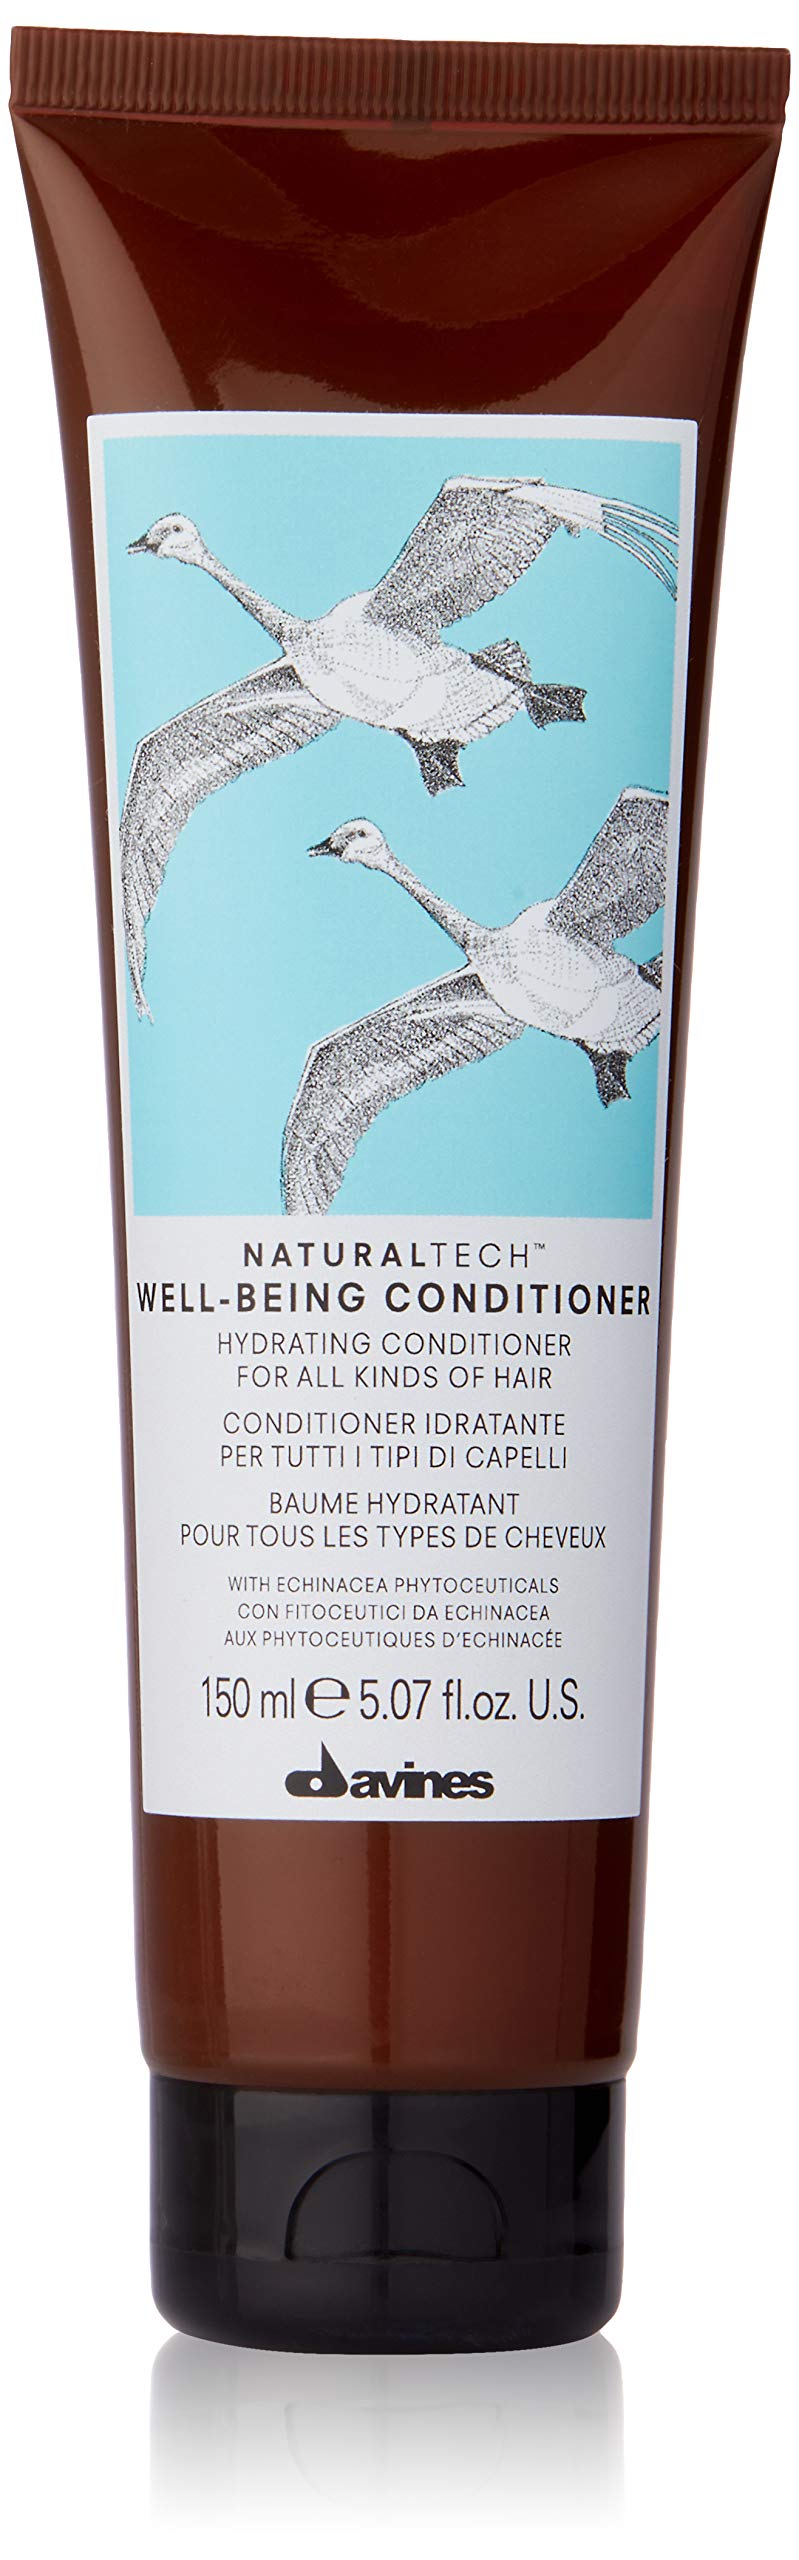 Davines Naturaltech WELLBEING Conditioner, Detangle While Adding Moisture And Shine, Leave Hair Easy To Style, 5.07 fl. oz.